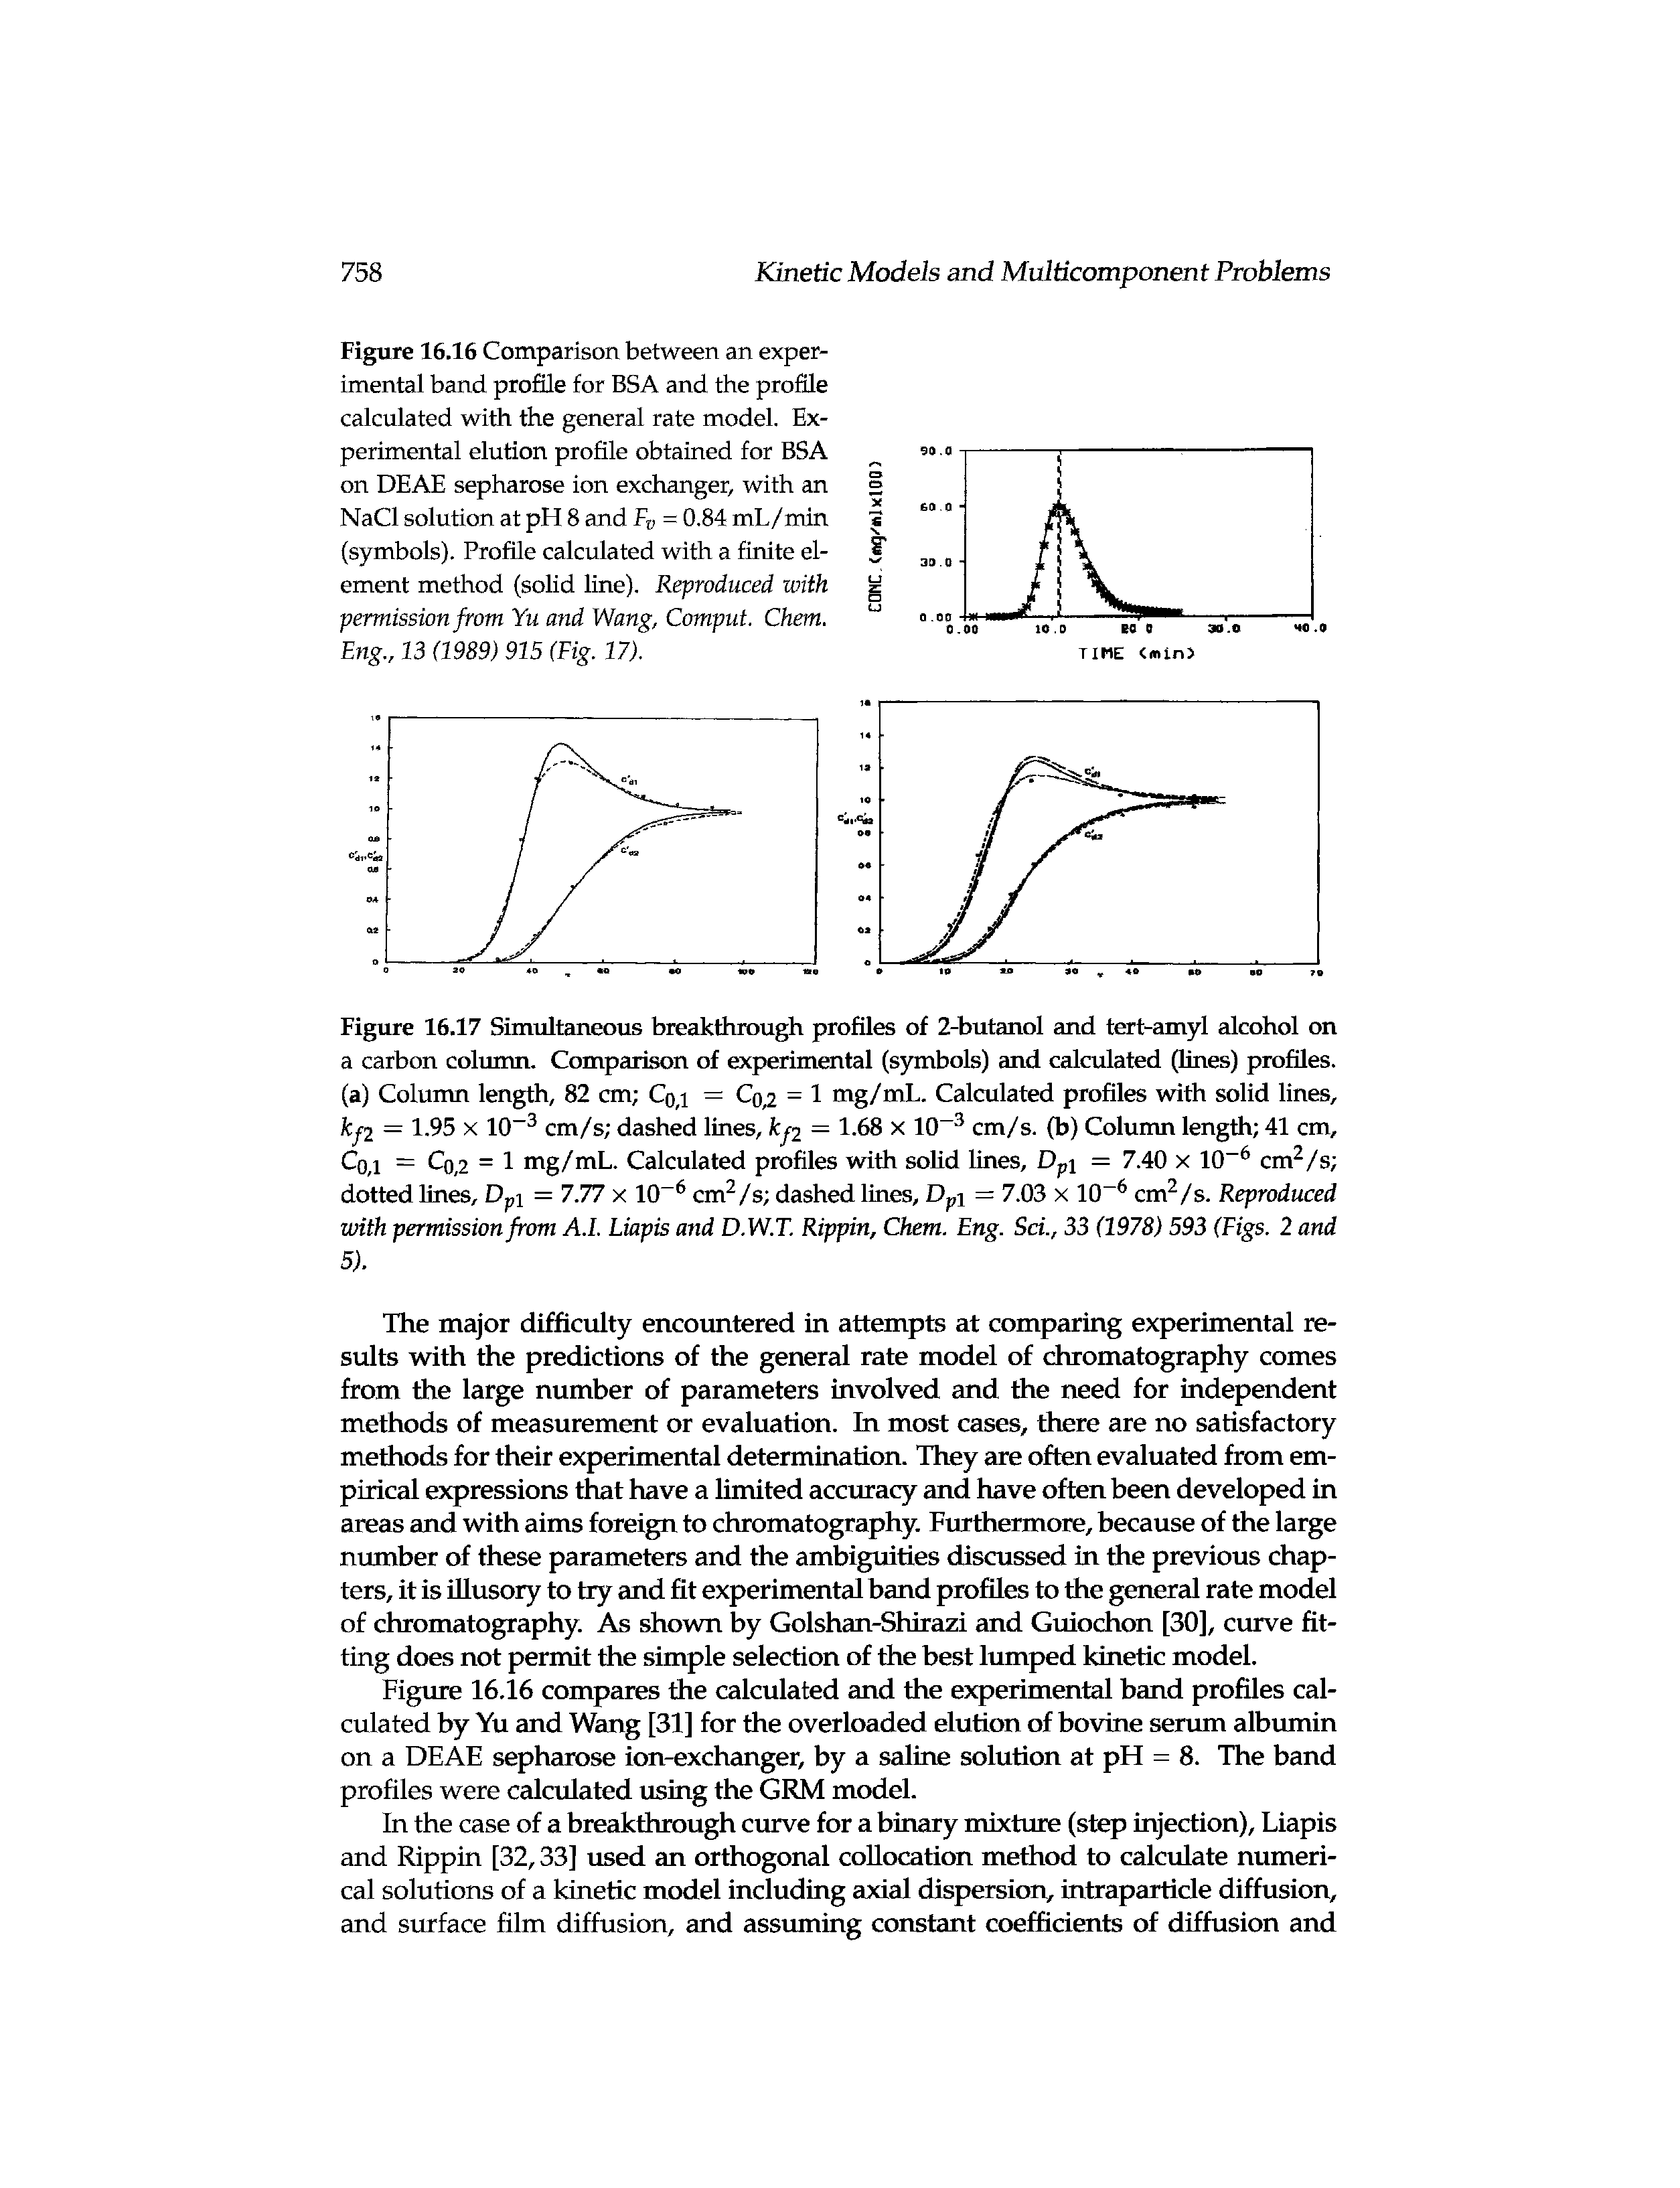 Figure 16.17 Simultaneous breakthrough profiles of 2-butanol and tert-amyl alcohol on a carbon column. Comparison of experimental (symbols) and calculated (hnes) profiles, (a) Column length, 82 cm Cq,i = Cq = 1 mg/mL. Calculated profiles with solid lines, kf2 = 1-95 X 10 cm/s dashed lines, fcy2 = 1-68 x 10 cm/s. (b) Column length 41 cm, Cq,i = Cq,2 = 1 mg/mL. Calculated profiles with solid lines. Dpi = 7.40 x 10 cm /s dotted lines. Dpi = 7.77 x 10 cm /s dashed lines. Dpi = 7.03 x 10 cm /s. Reproduced with permission from A.l. Liapis and D.W.T. Rippin, Chem. Eng. Sci., 33 (1978) 593 (Figs. 2 and 5).